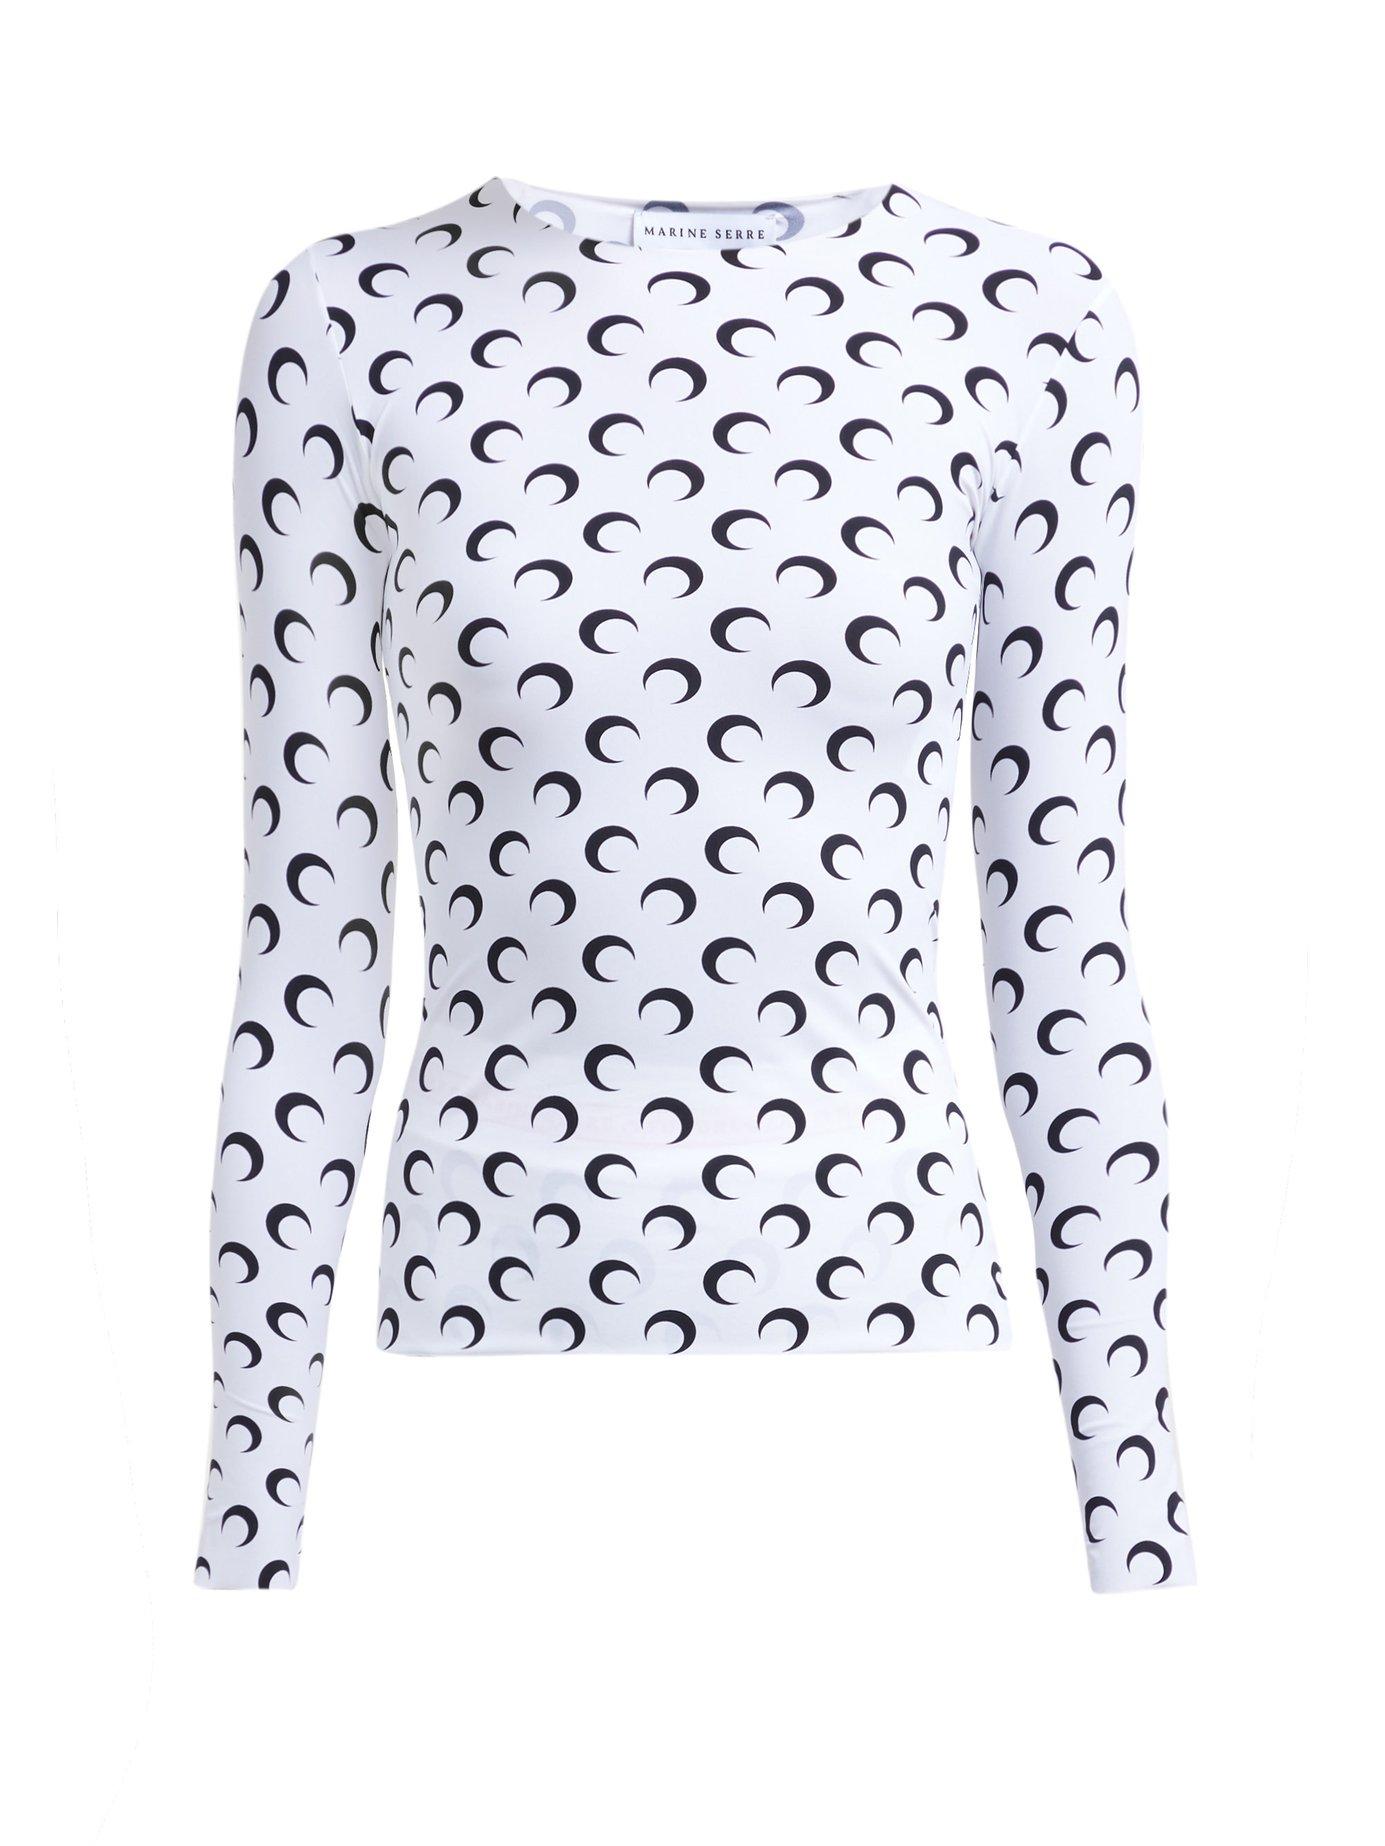 Marine Serre Crescent Moon Print Long Sleeved T Shirt in White | Lyst